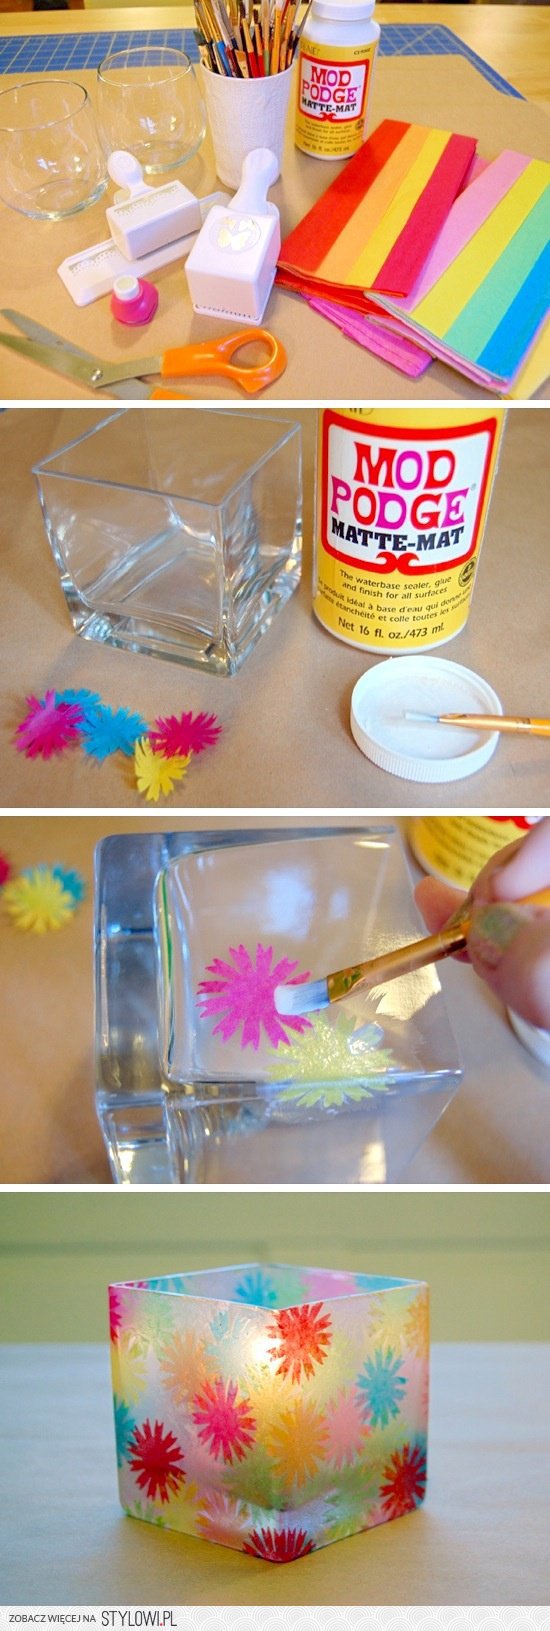 DIY Cool Kids Room Crafts That Will Make Your Kids Feel Special